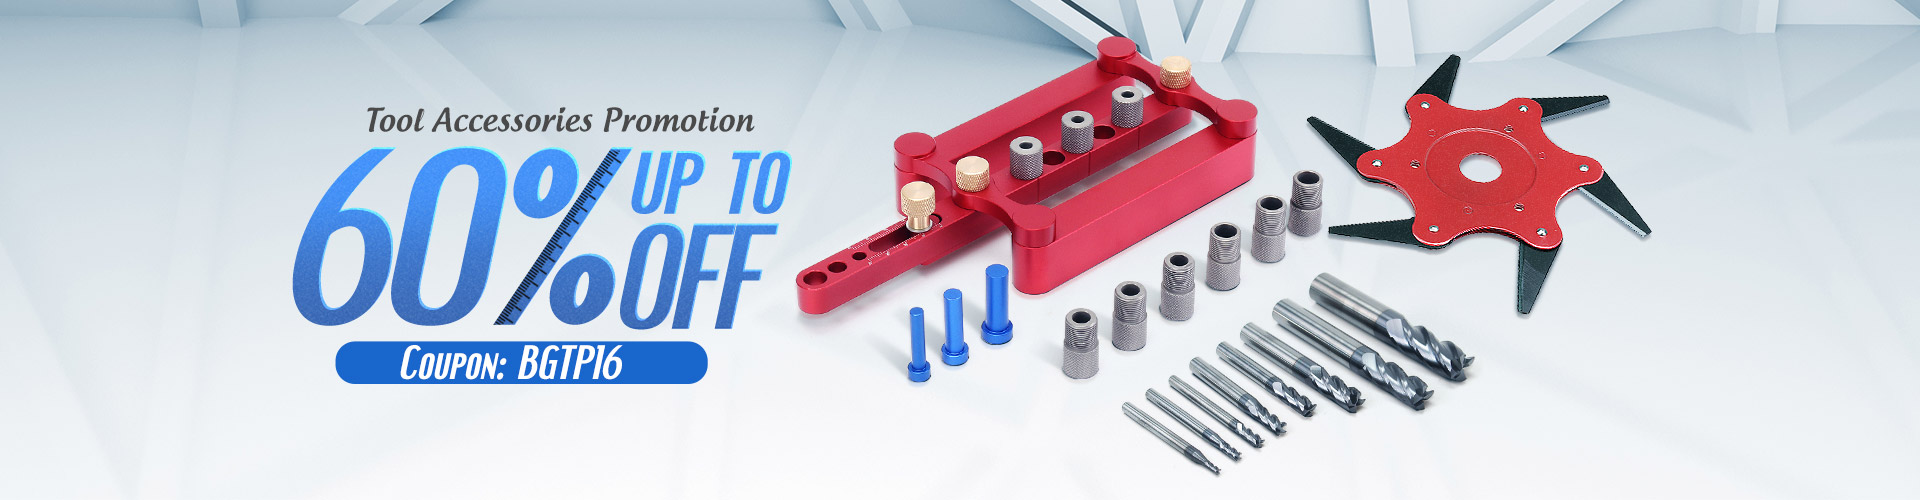 Extra 16% OFF for Tool Accessories Promotion